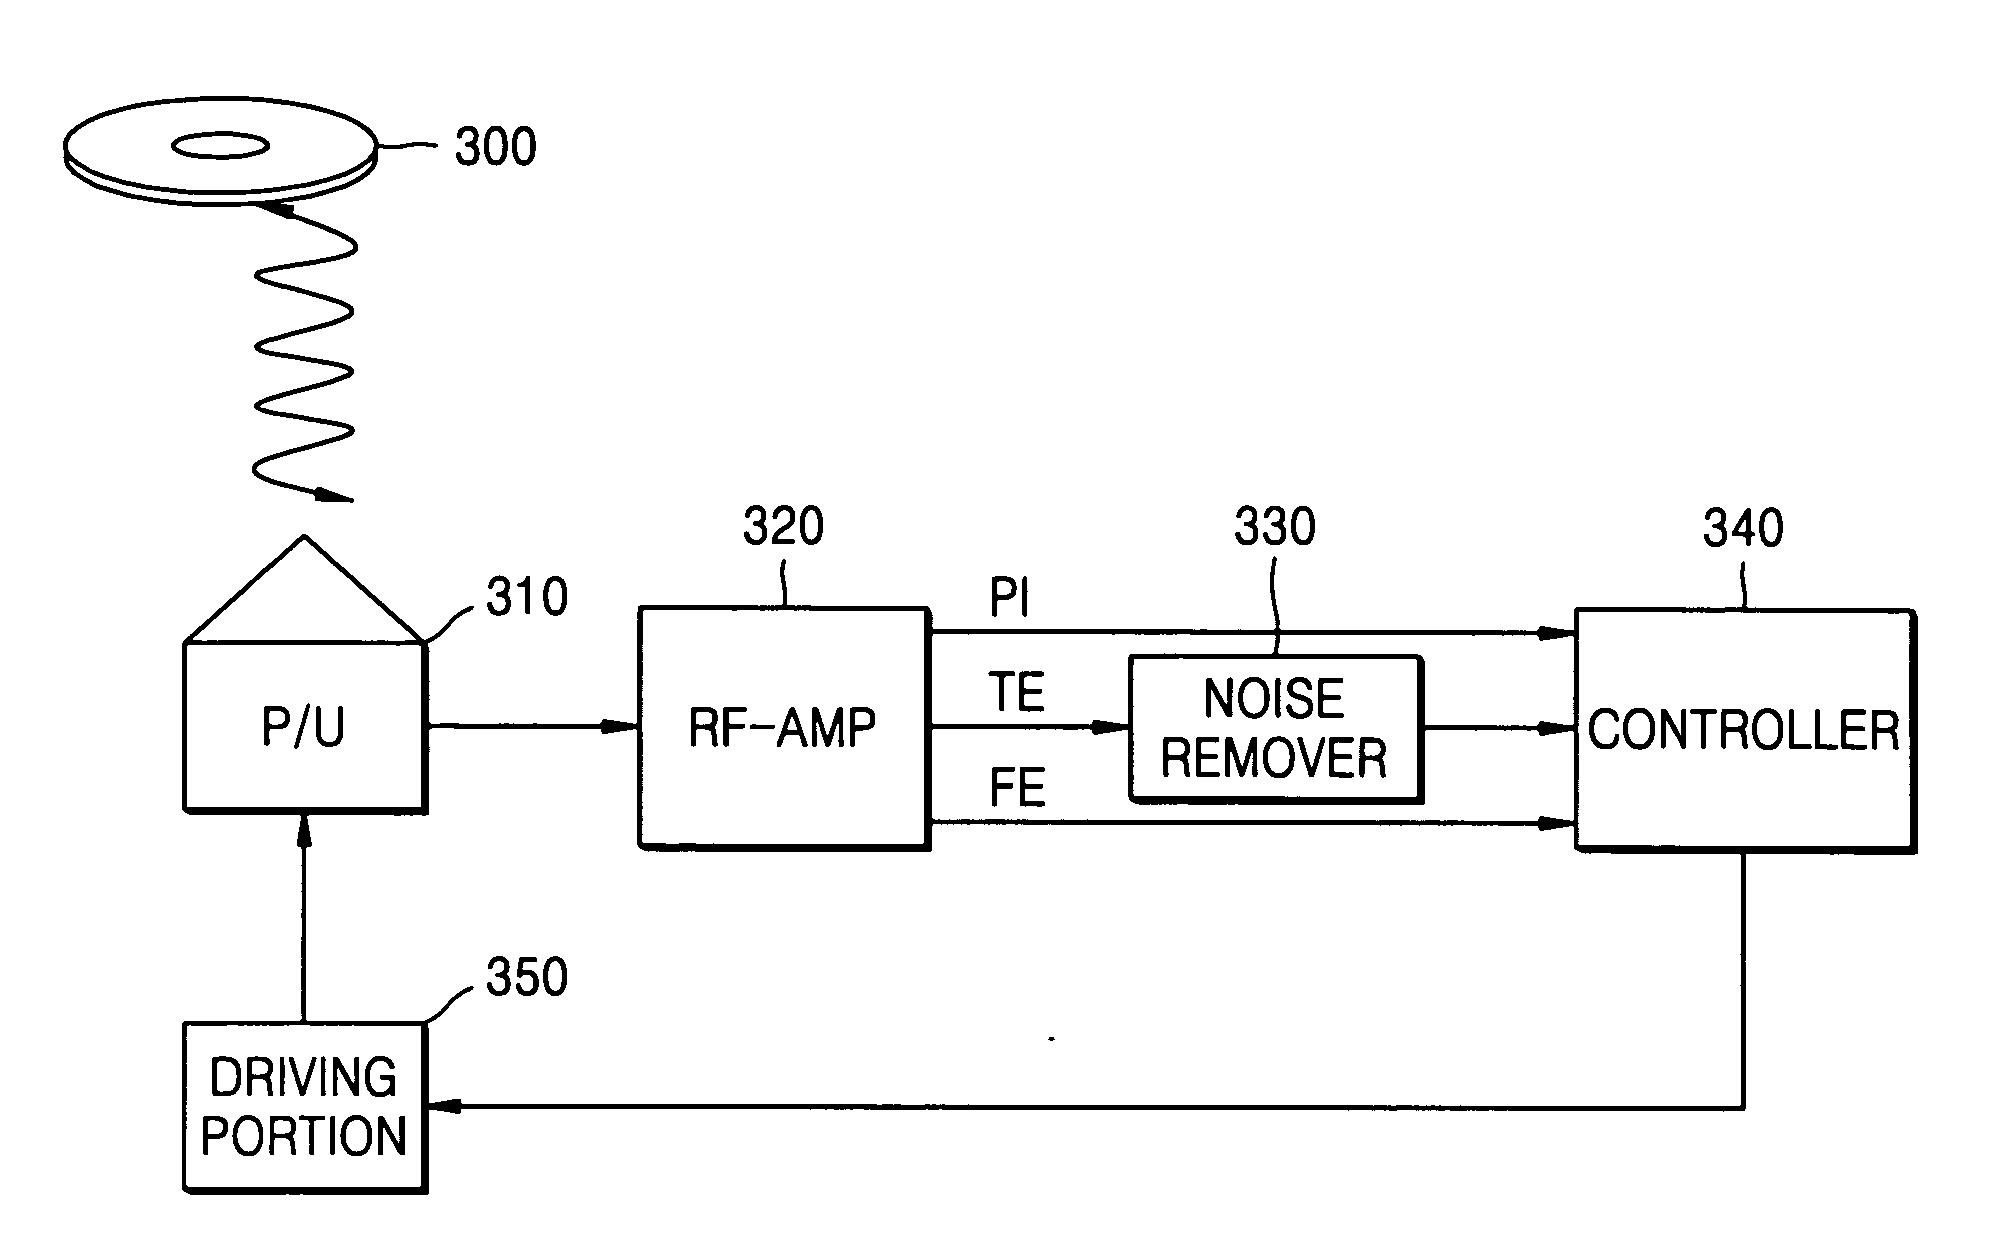 Method and apparatus of determining a type of disc